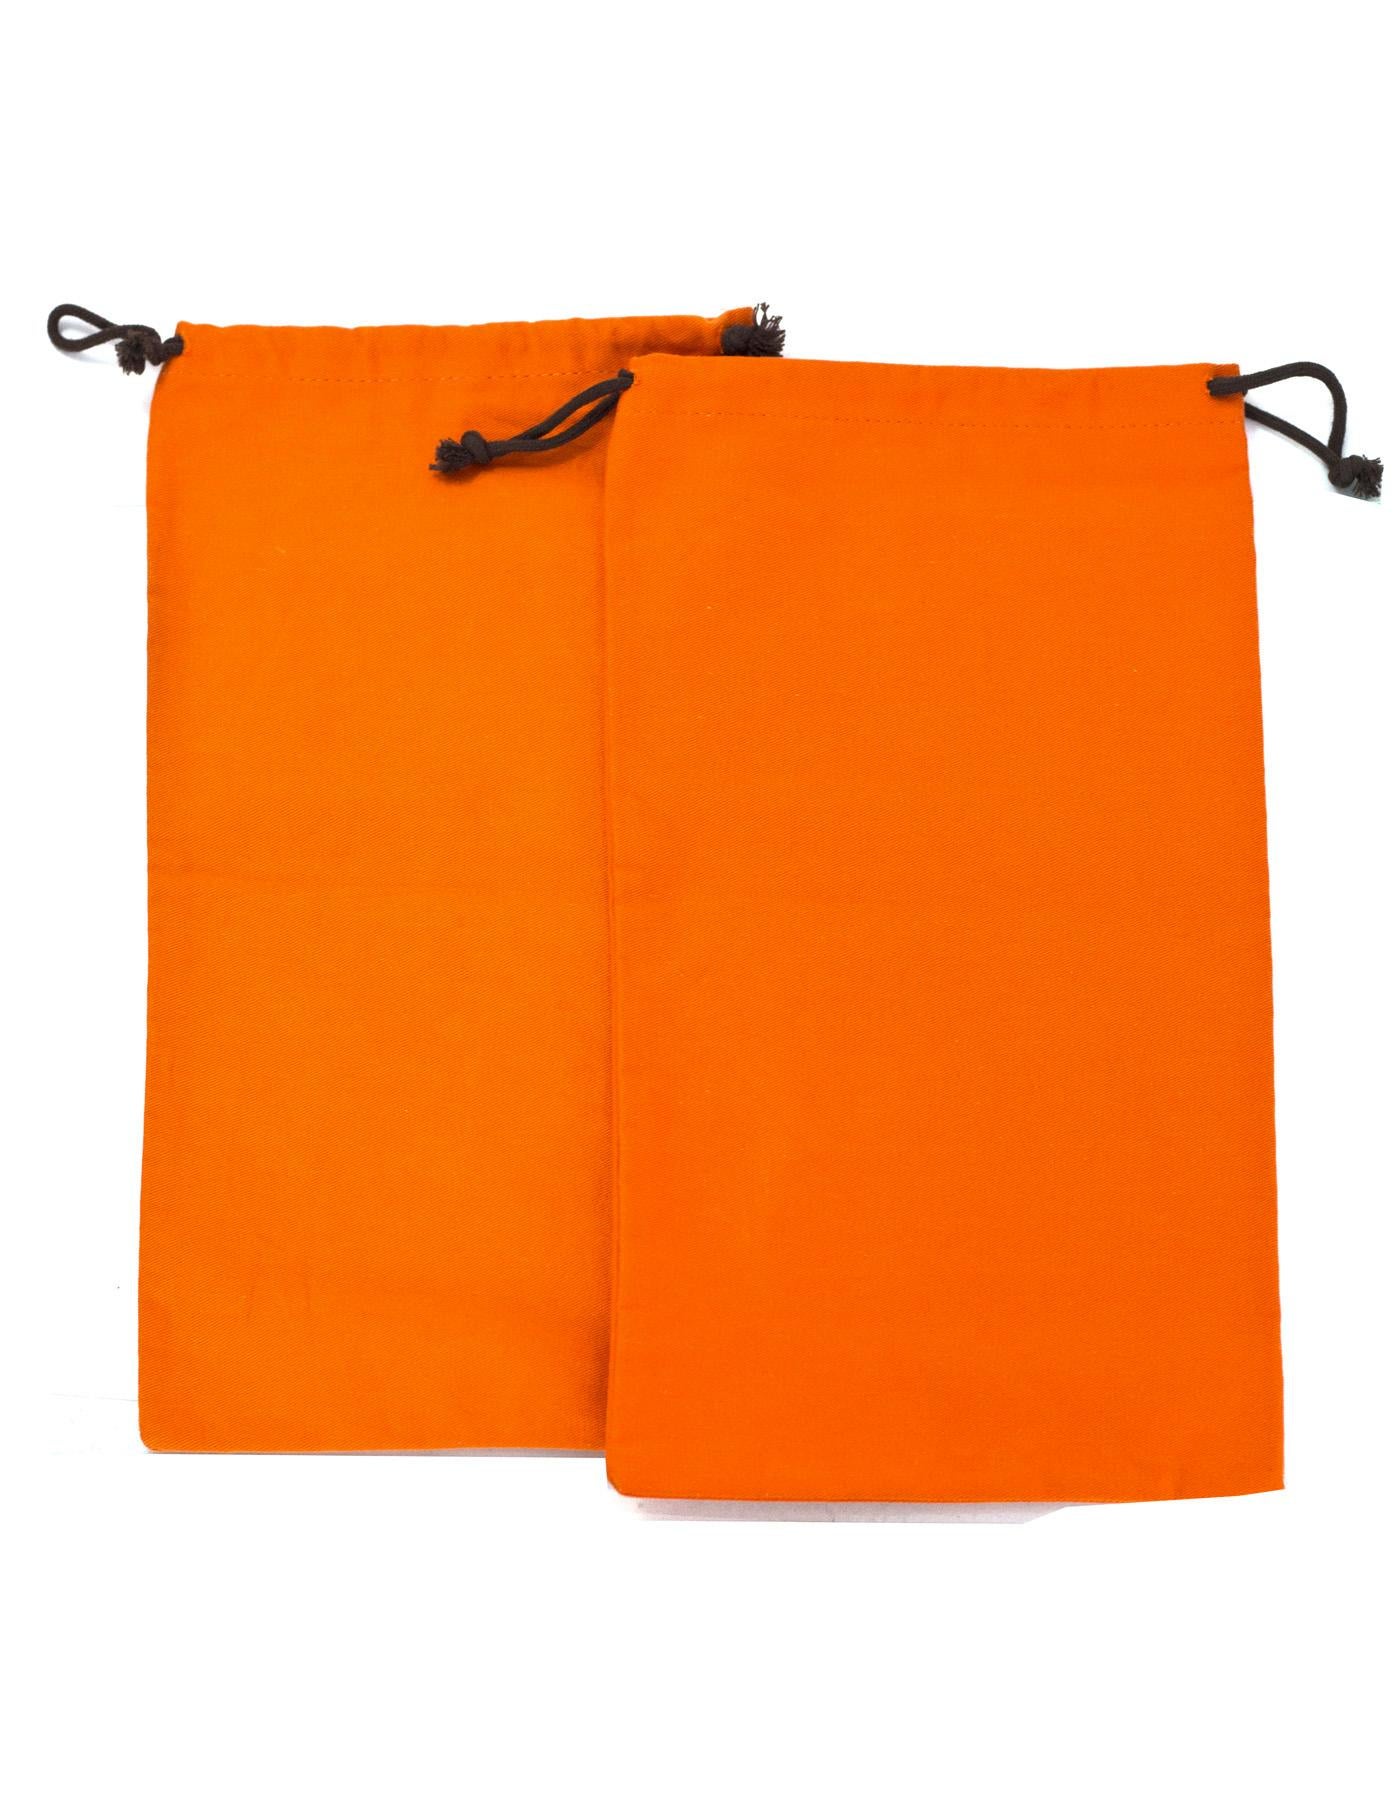 Hermes Orange Canvas Set of Two Travel Shoe Dust Bags
Features Hermes logo printed on front

Color: Orange and brown
Materials: Canvas
Closure/Opening: Drawstring closure
Overall Condition: Excellent pre-owned condition 

Measurements: 
Width: